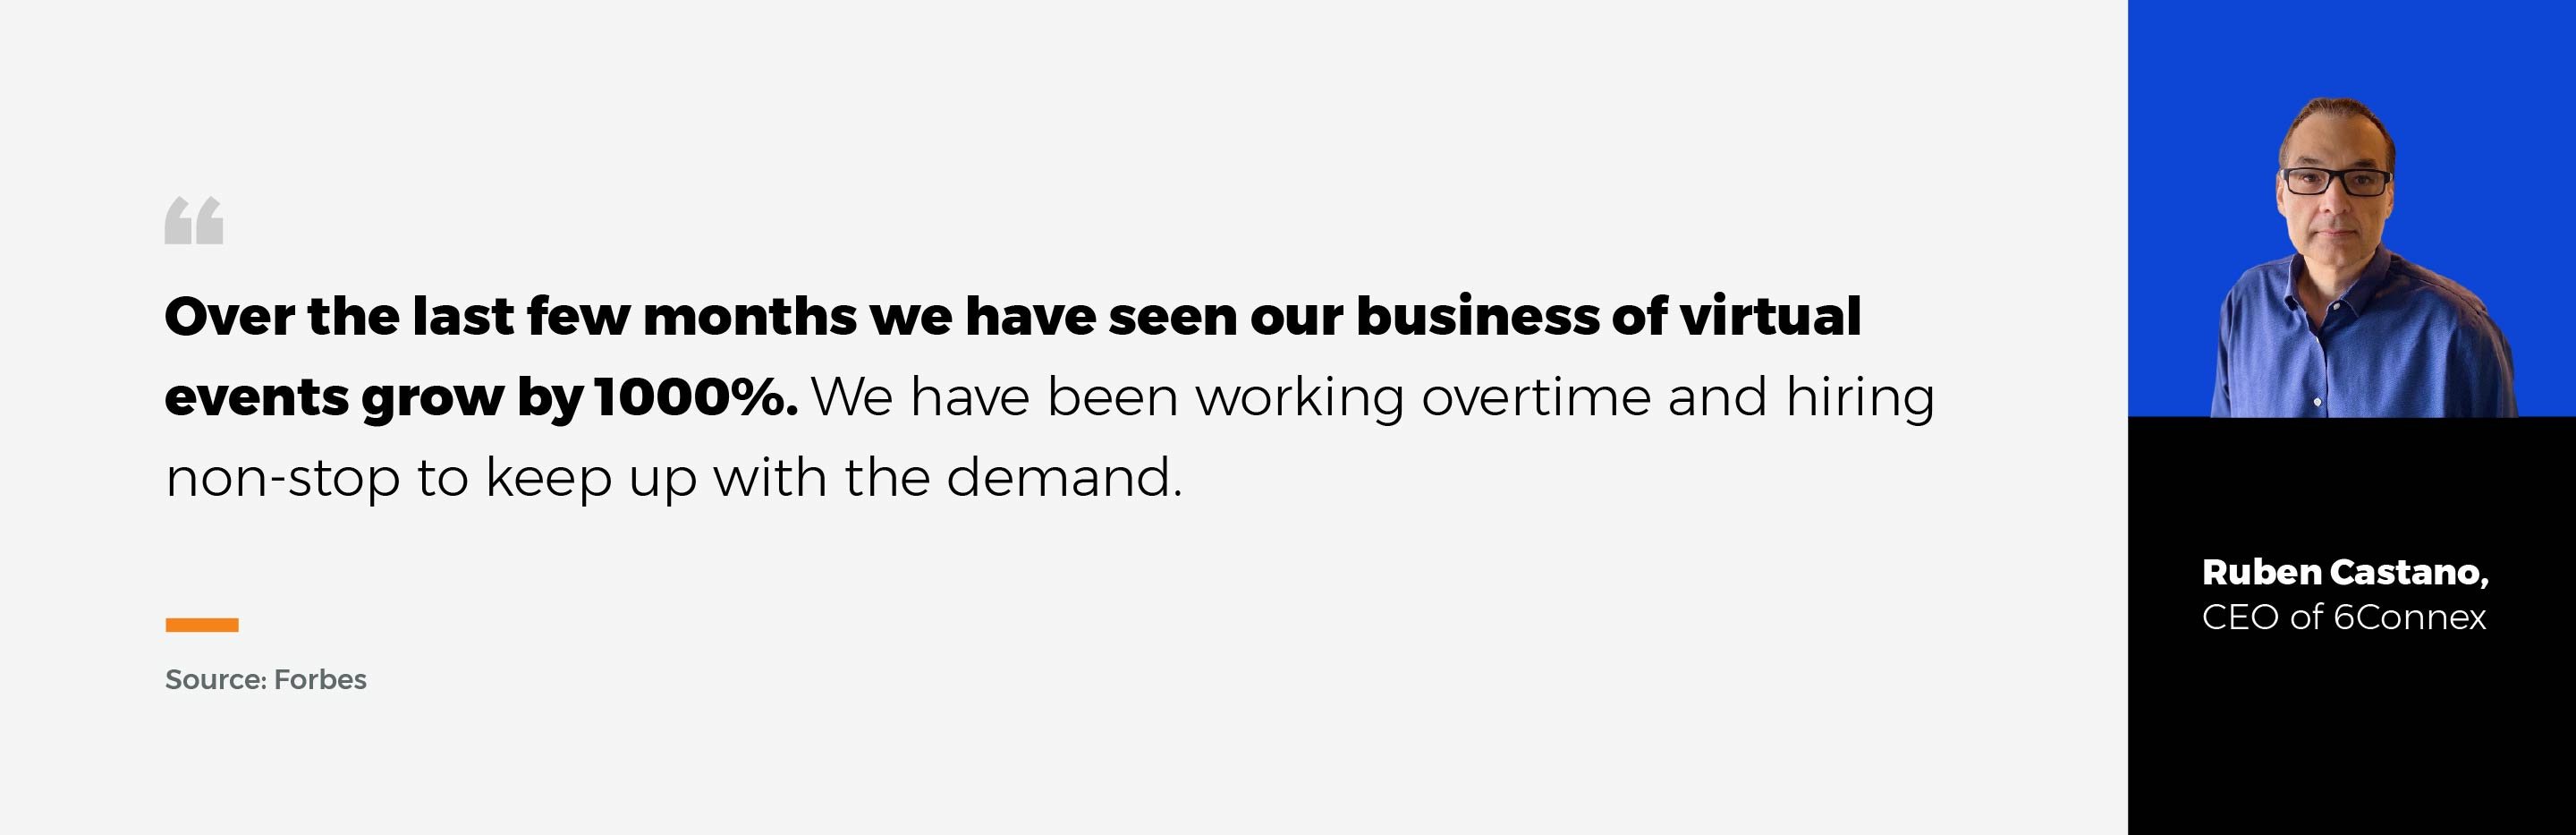 Quote from Ruben Castano, CEO of 6 Connex: Over the last few months we have seen our business of virtual events grow by one thousand percent. We have been working overtime and hiring non-stop to keep up with the demand. 